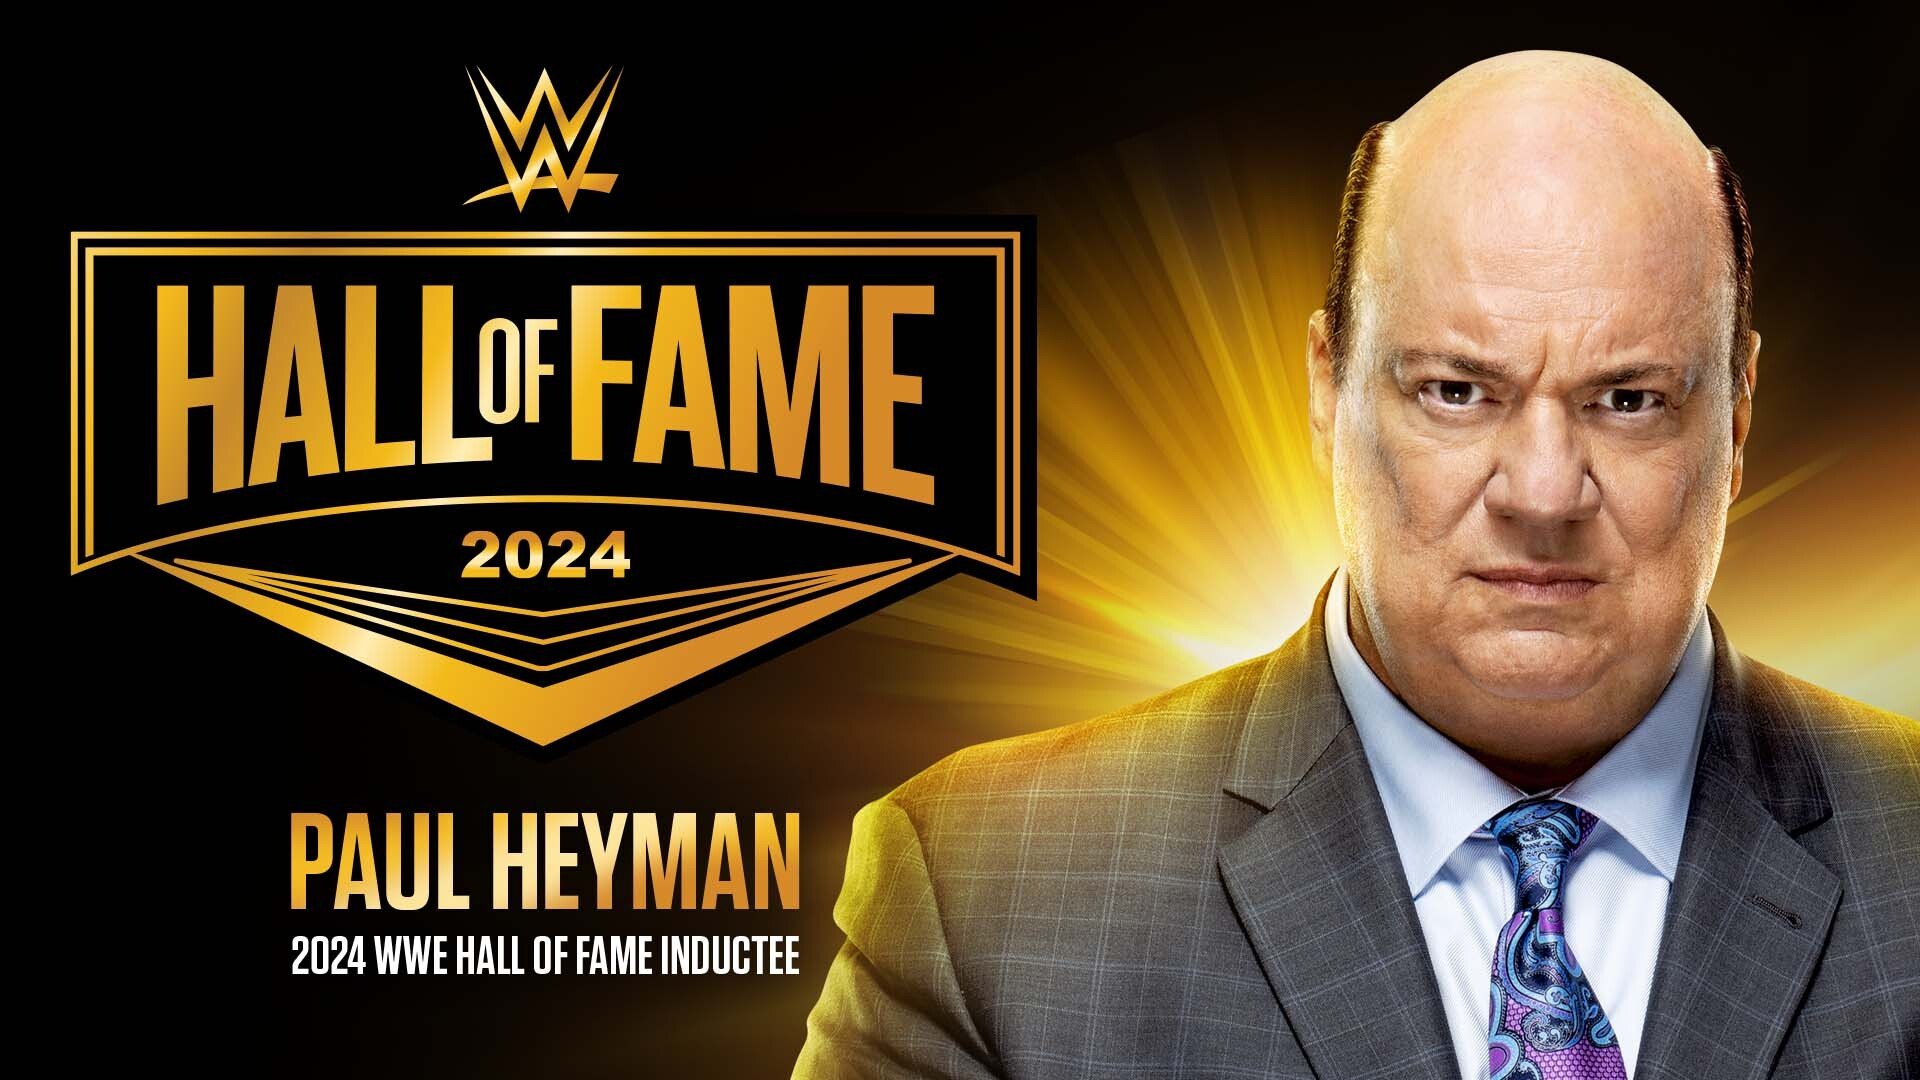 Bully Ray discusses Paul Heyman as WWE Hall of Fame inductor, while Natalya sends congratulations to Bull Nakano